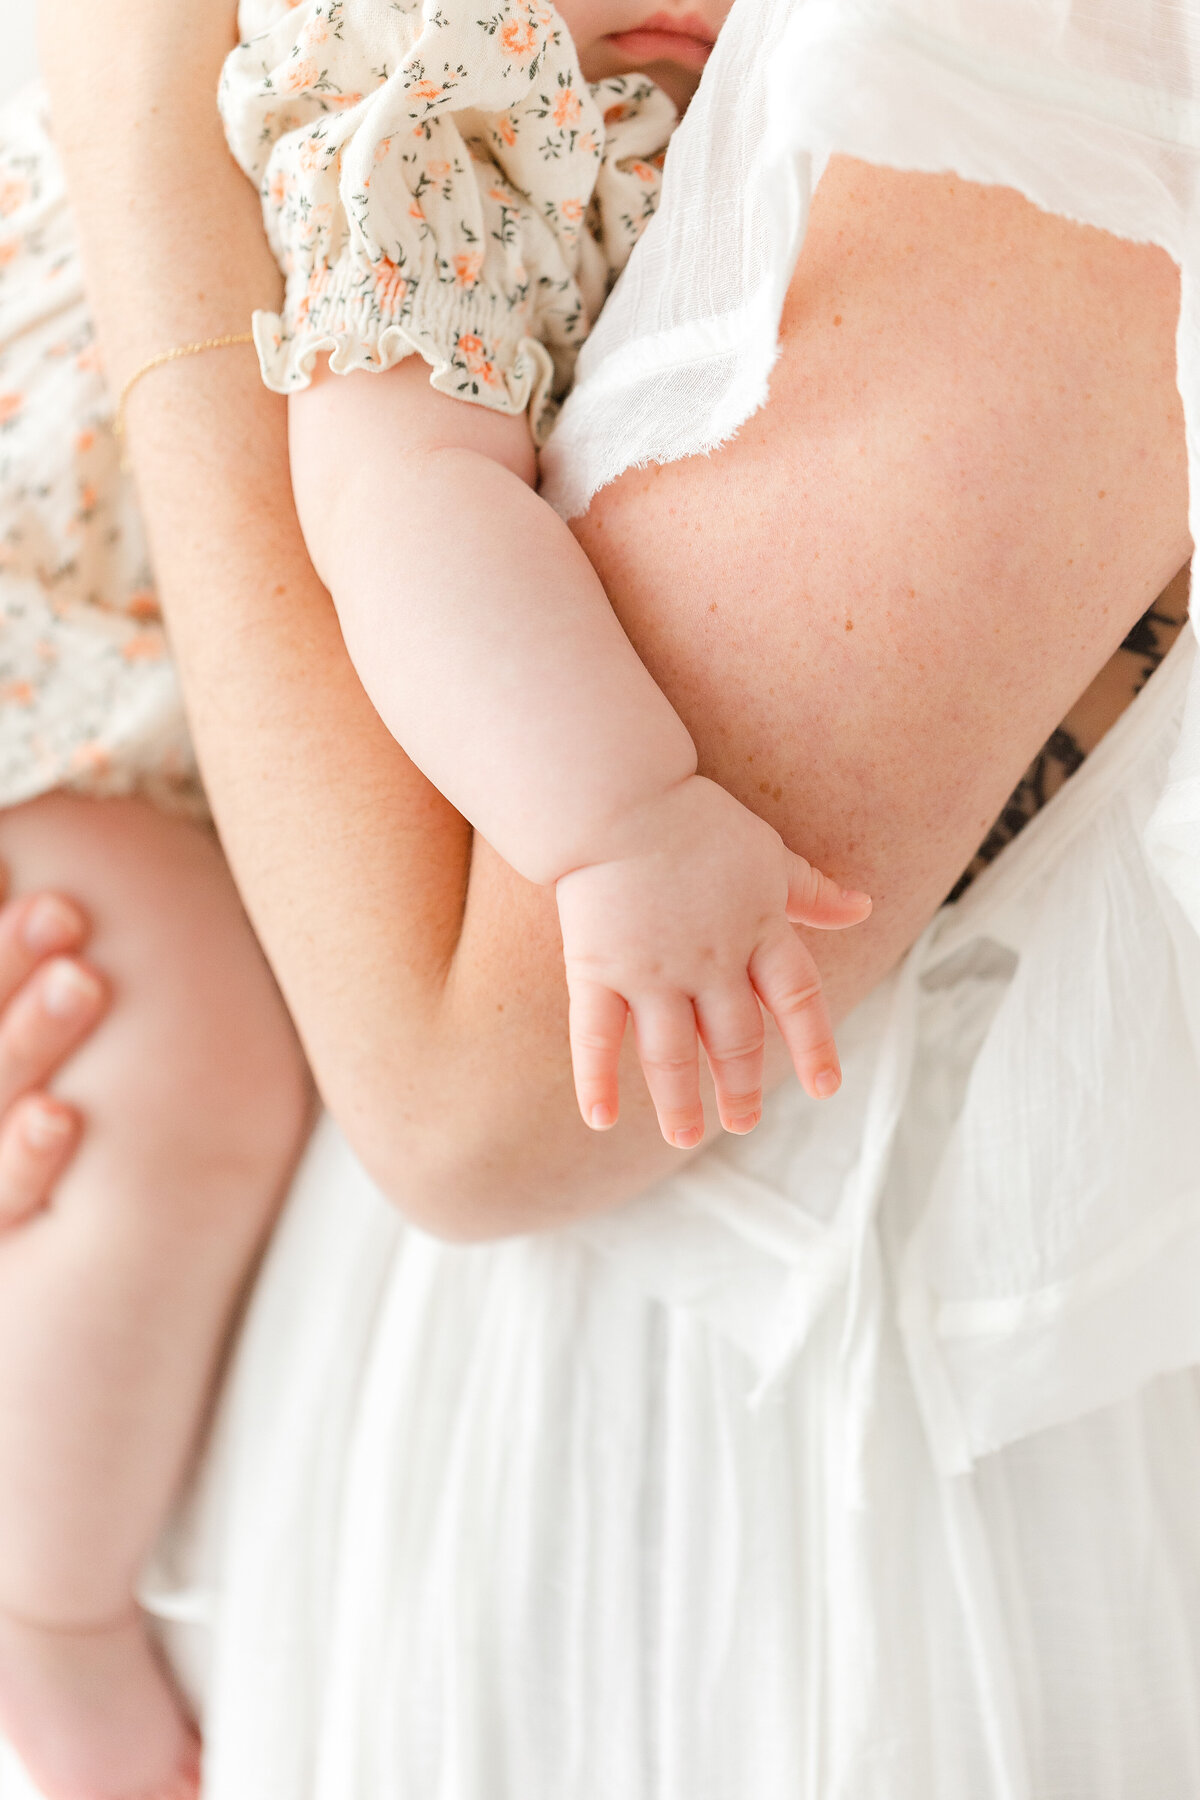 A closeup photo focused on a baby's hands by washington dc family photographer